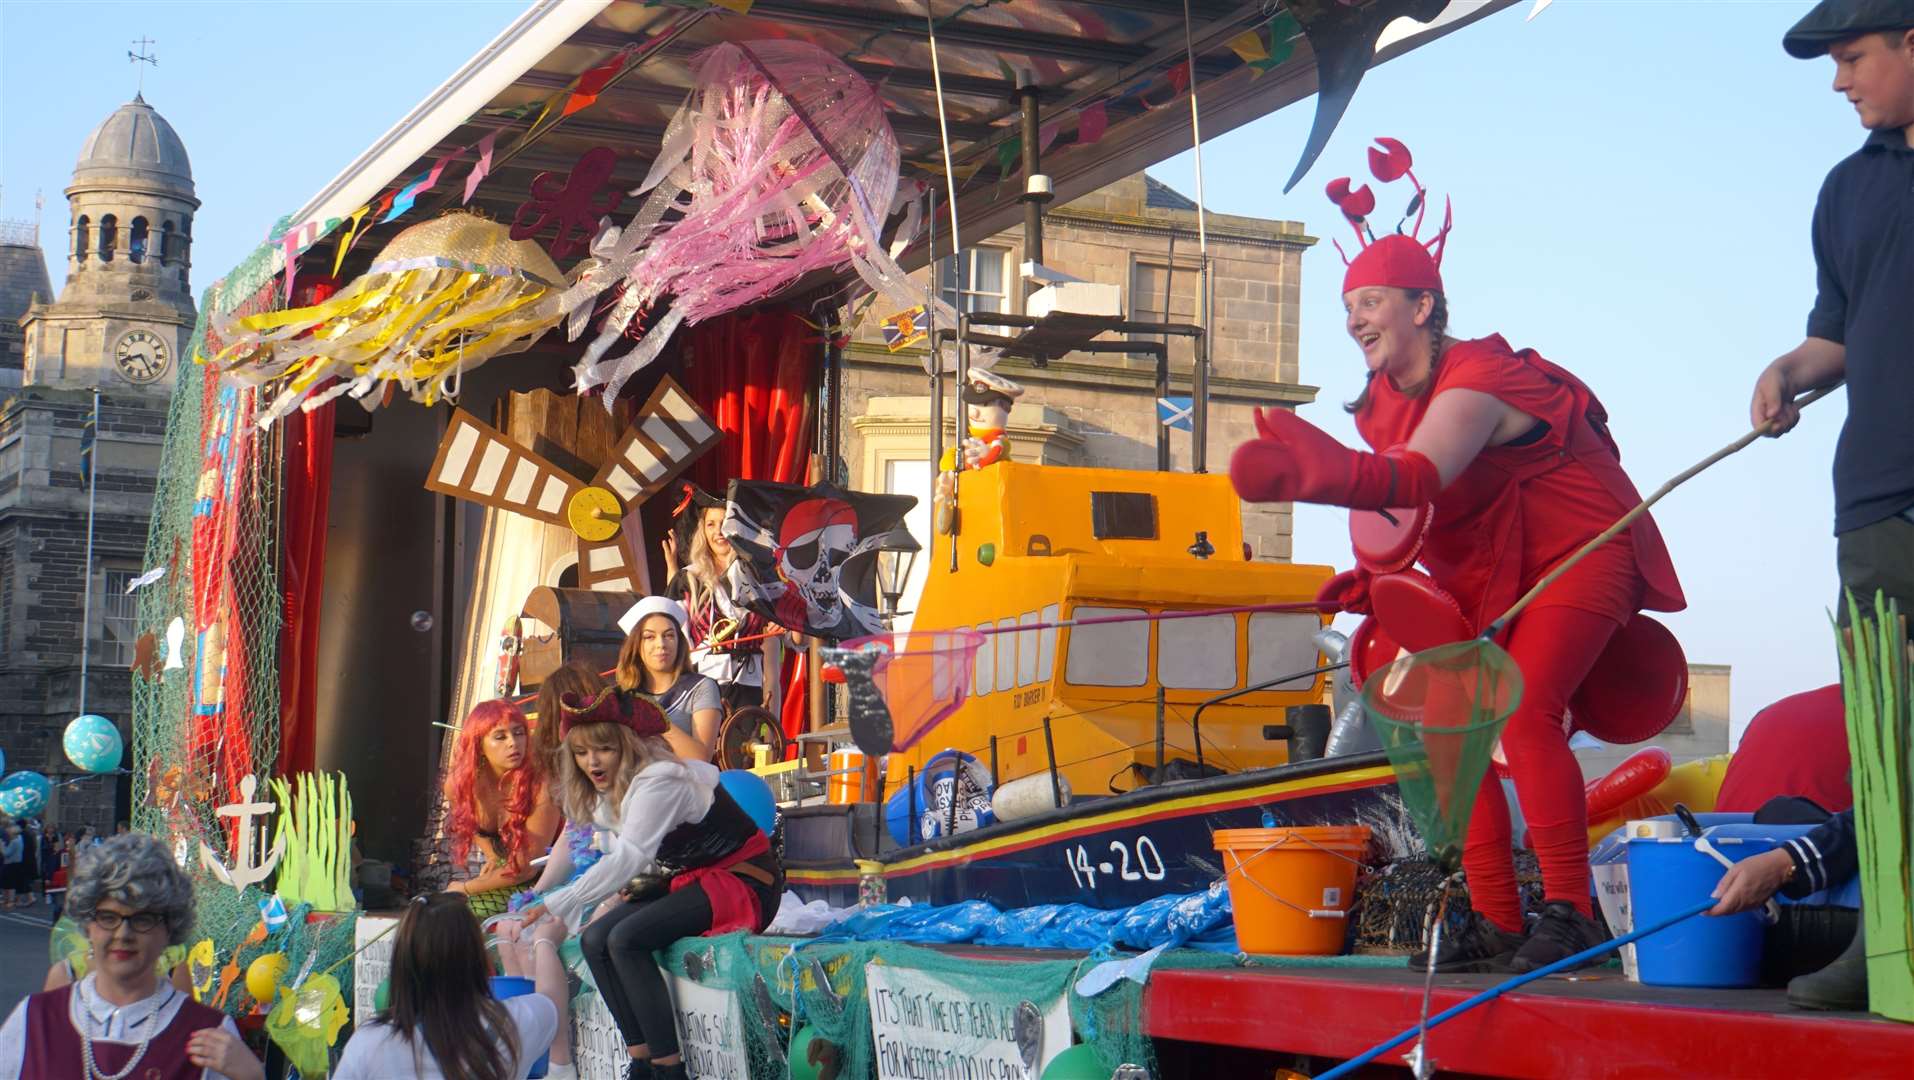 One of the decorated floats passing through the town centre during Wick Gala Week 2019. Picture: DGS